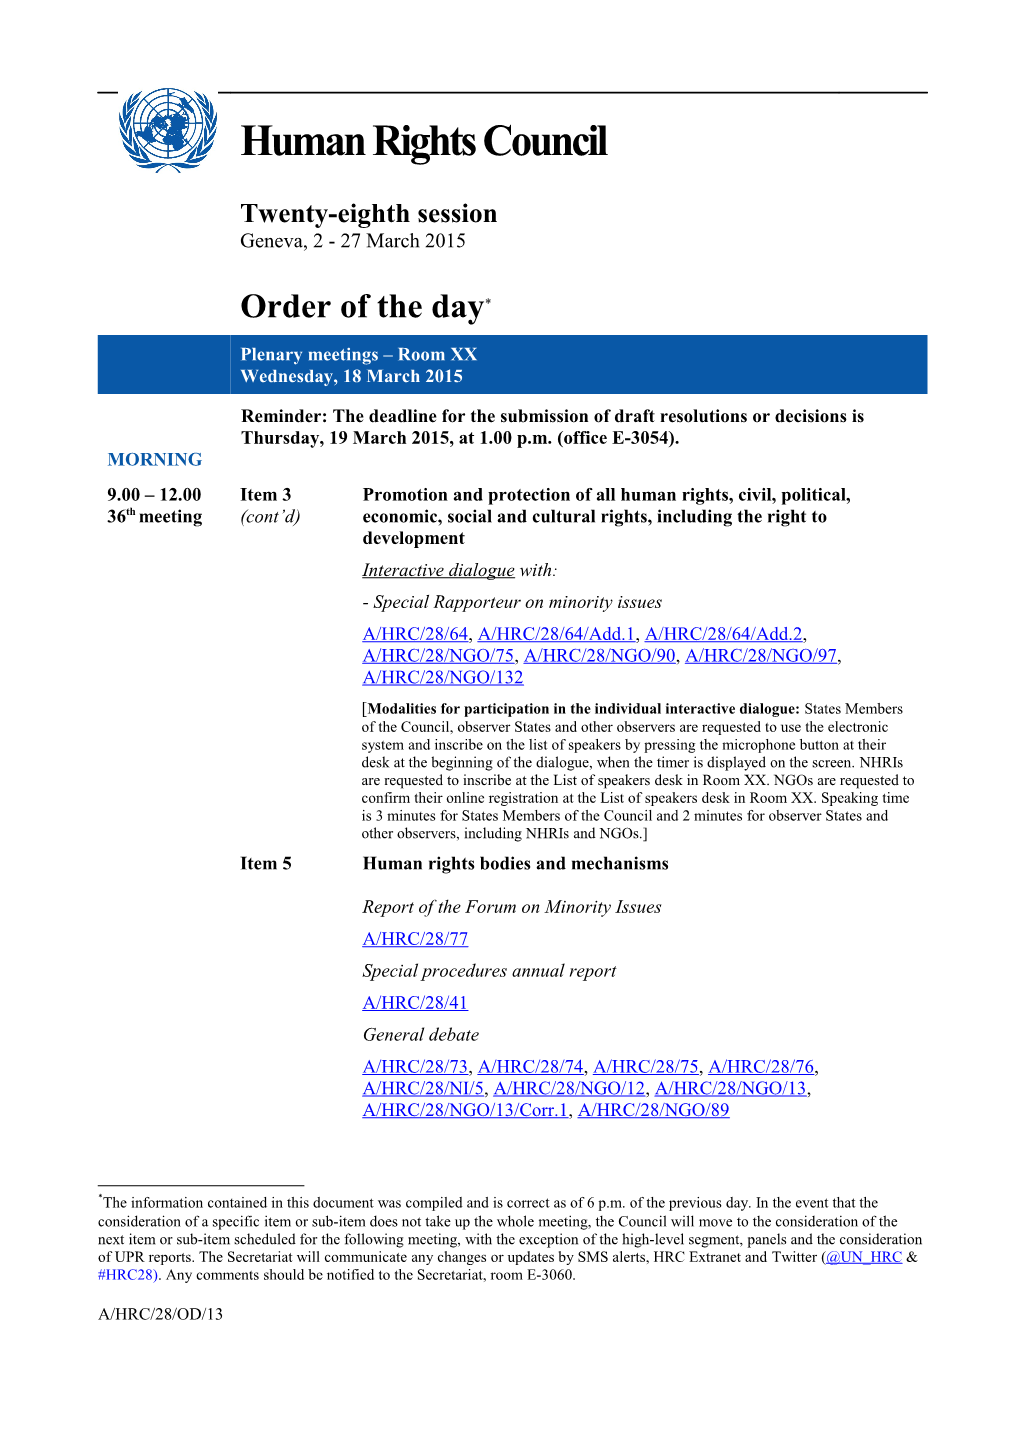 Order of the Day, Wednesday 18 March 2015